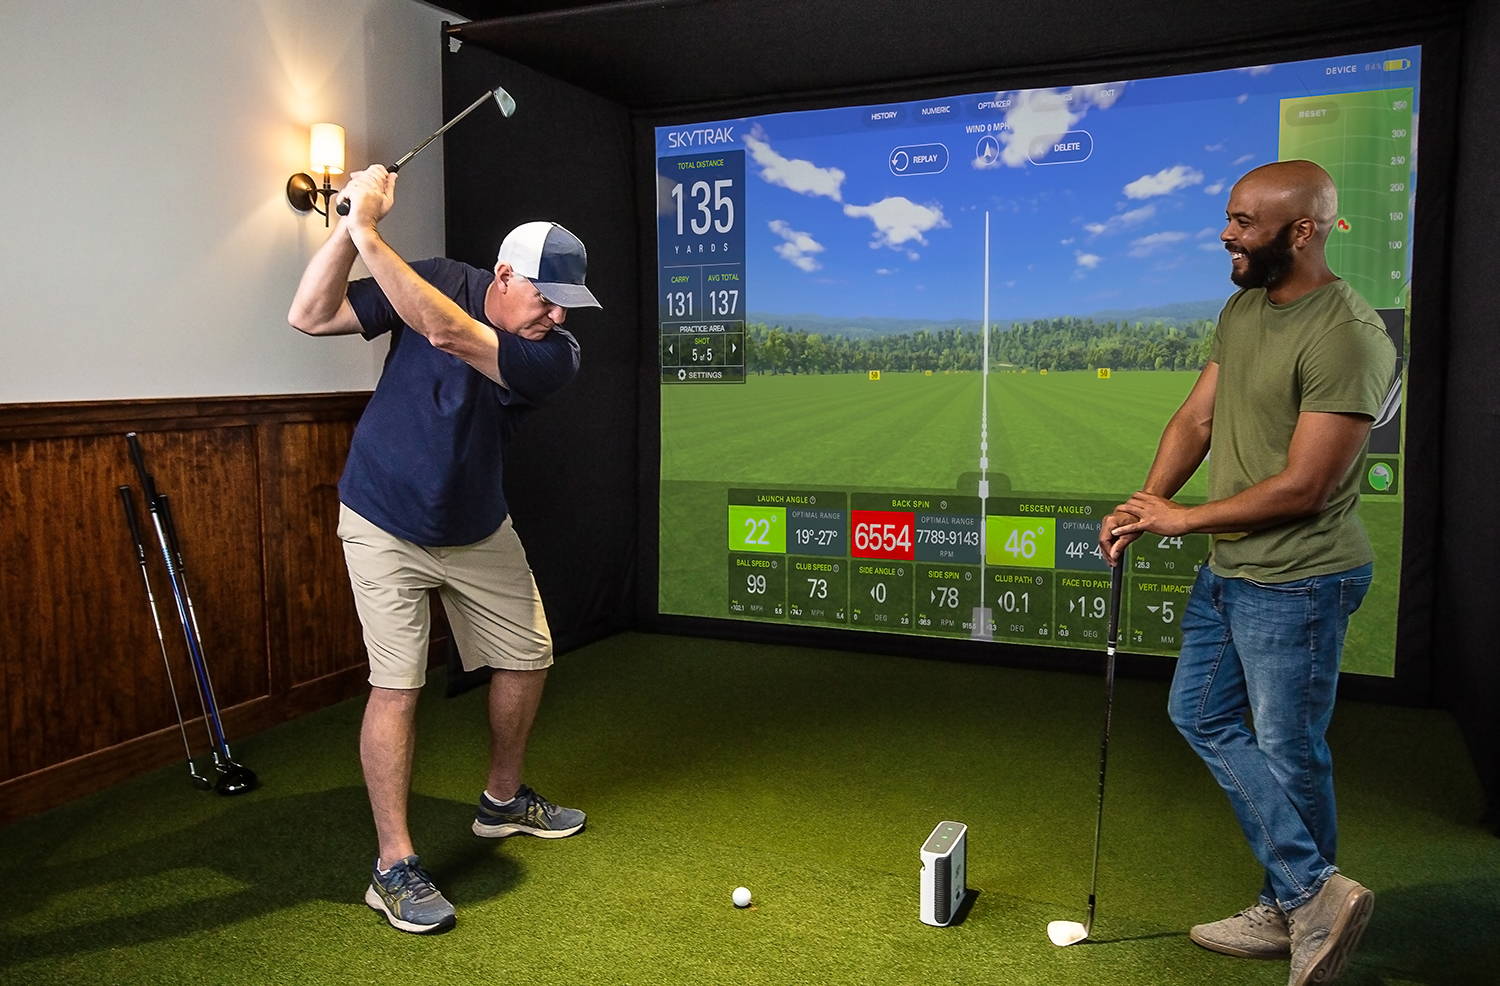 Two golfers, one swinging, one watching in an indoor golf simulator with a SkyTrak+ golf launch monitor in front of a large impact screen